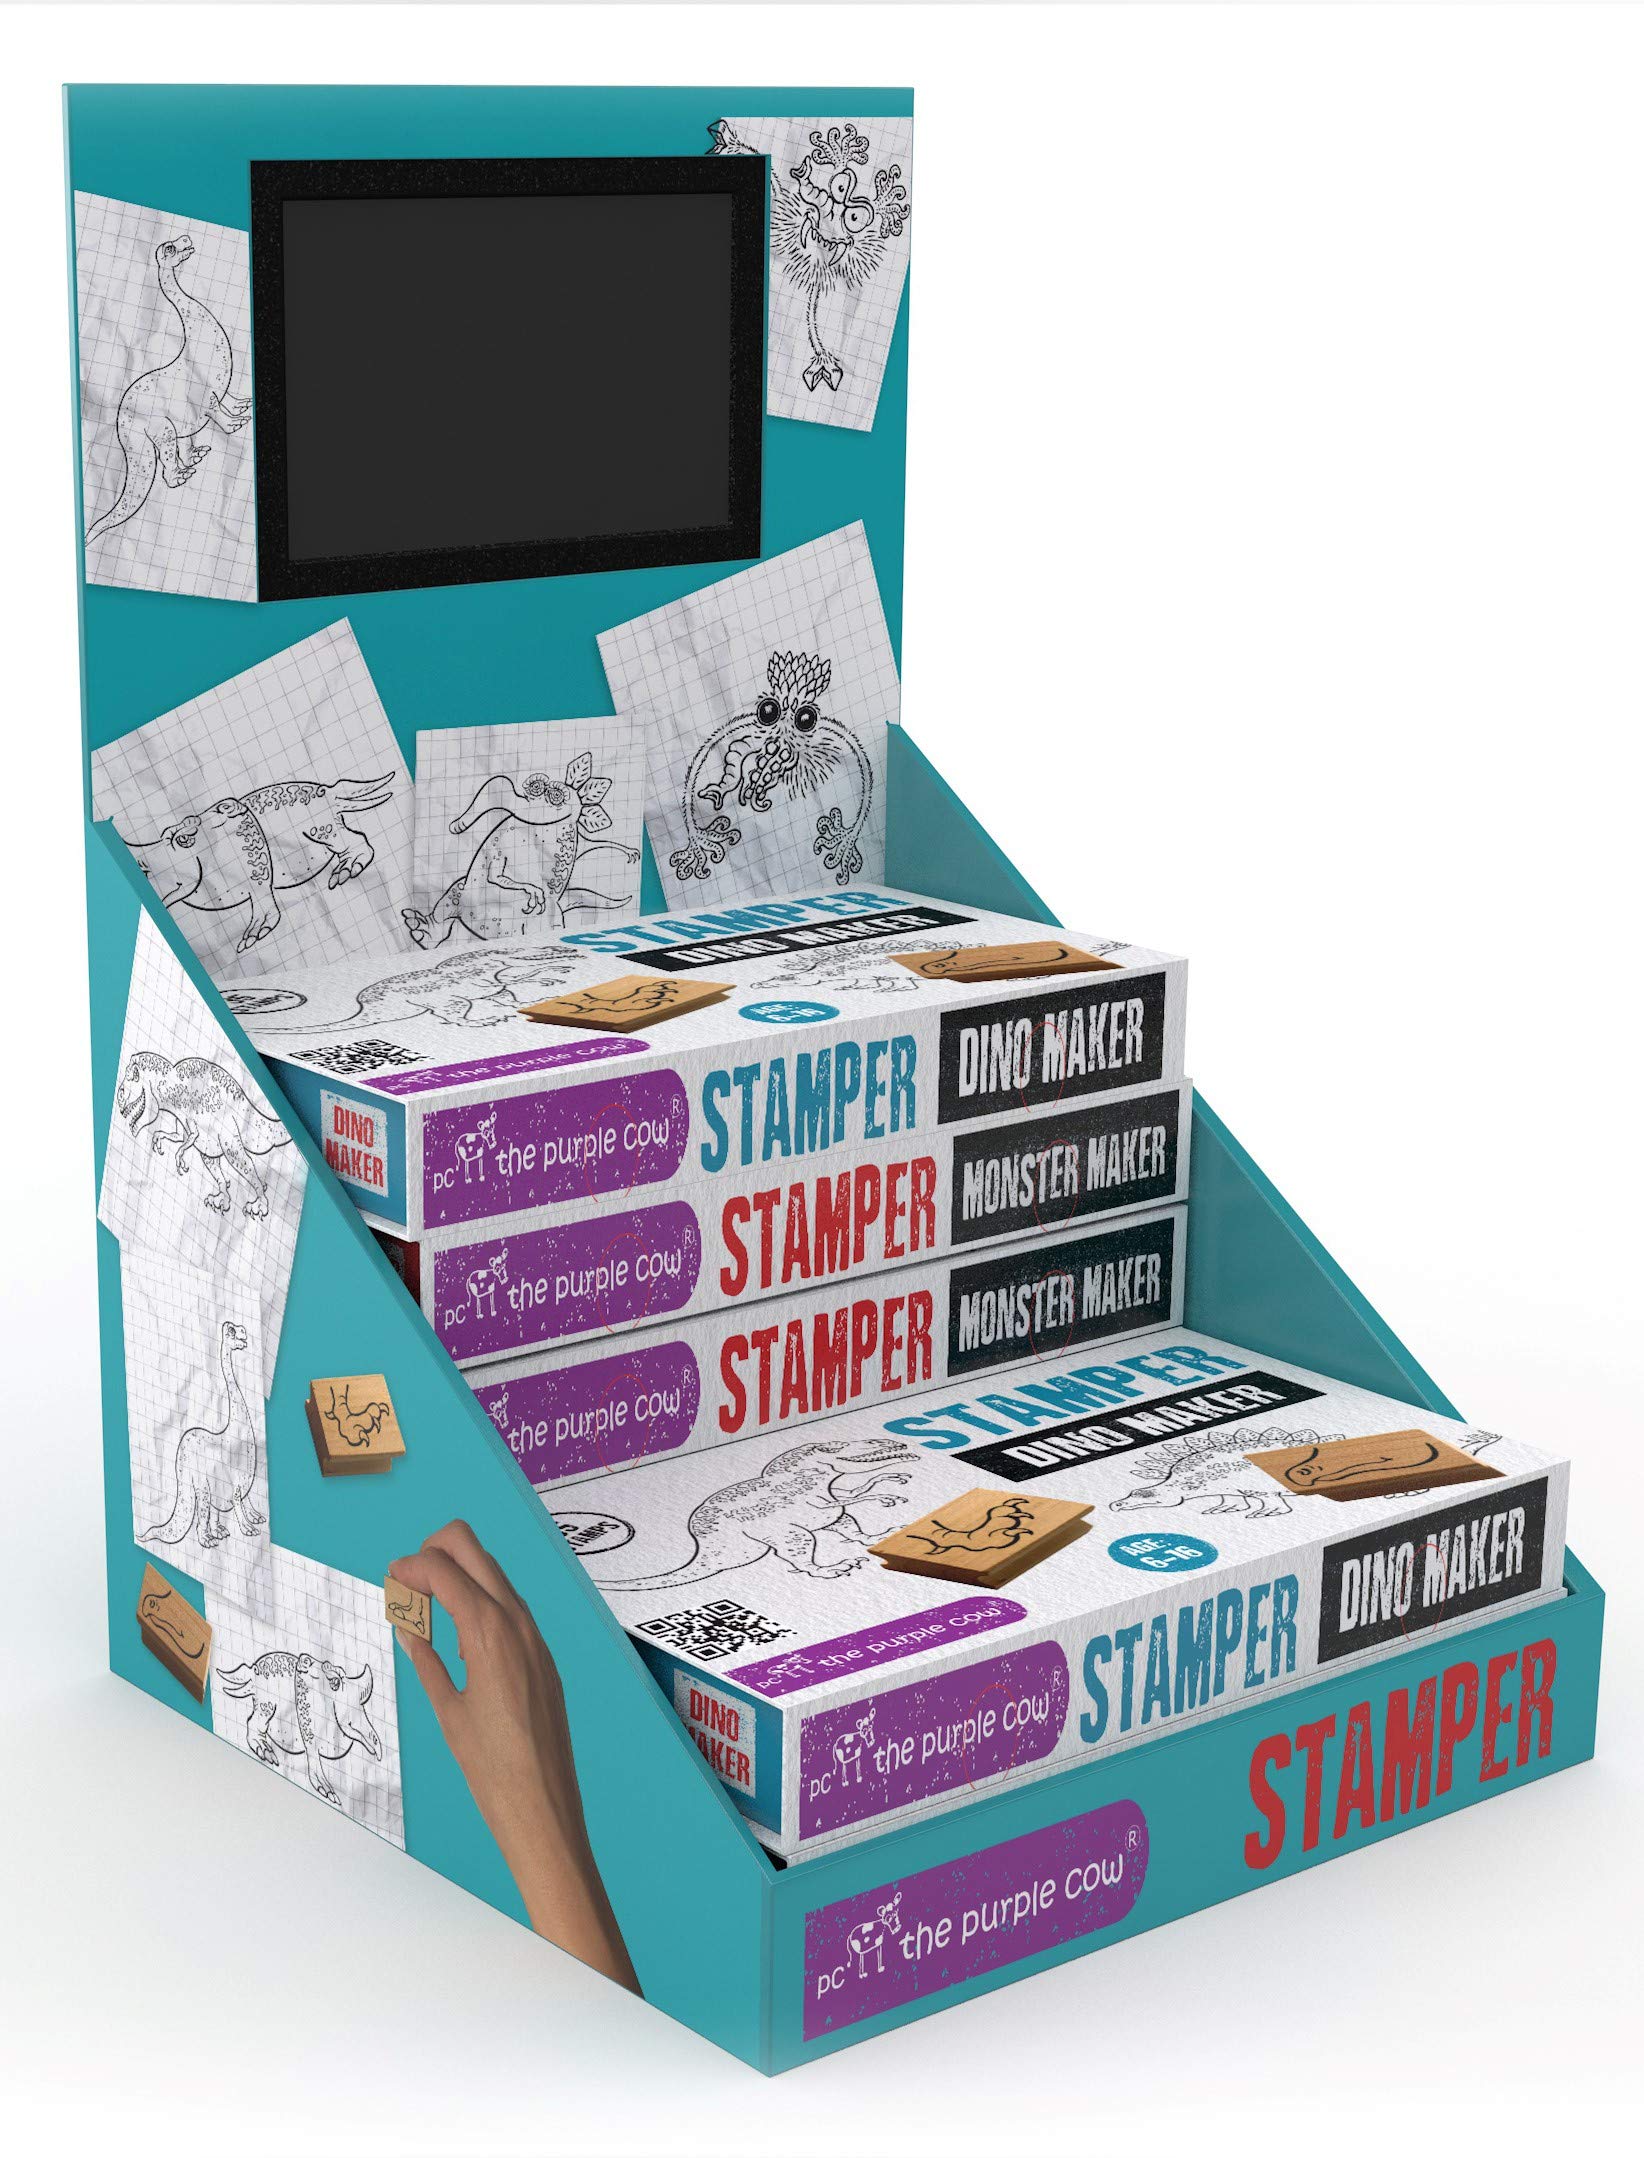 The Purple Cow - Stamper - Monster Maker Stamp Kit for Kids. Paint Stamper for Arts and Crafts. Develop Creativity with 31 Stamps and an Ink pad, for Girls and Boys Ages 6 to 16.